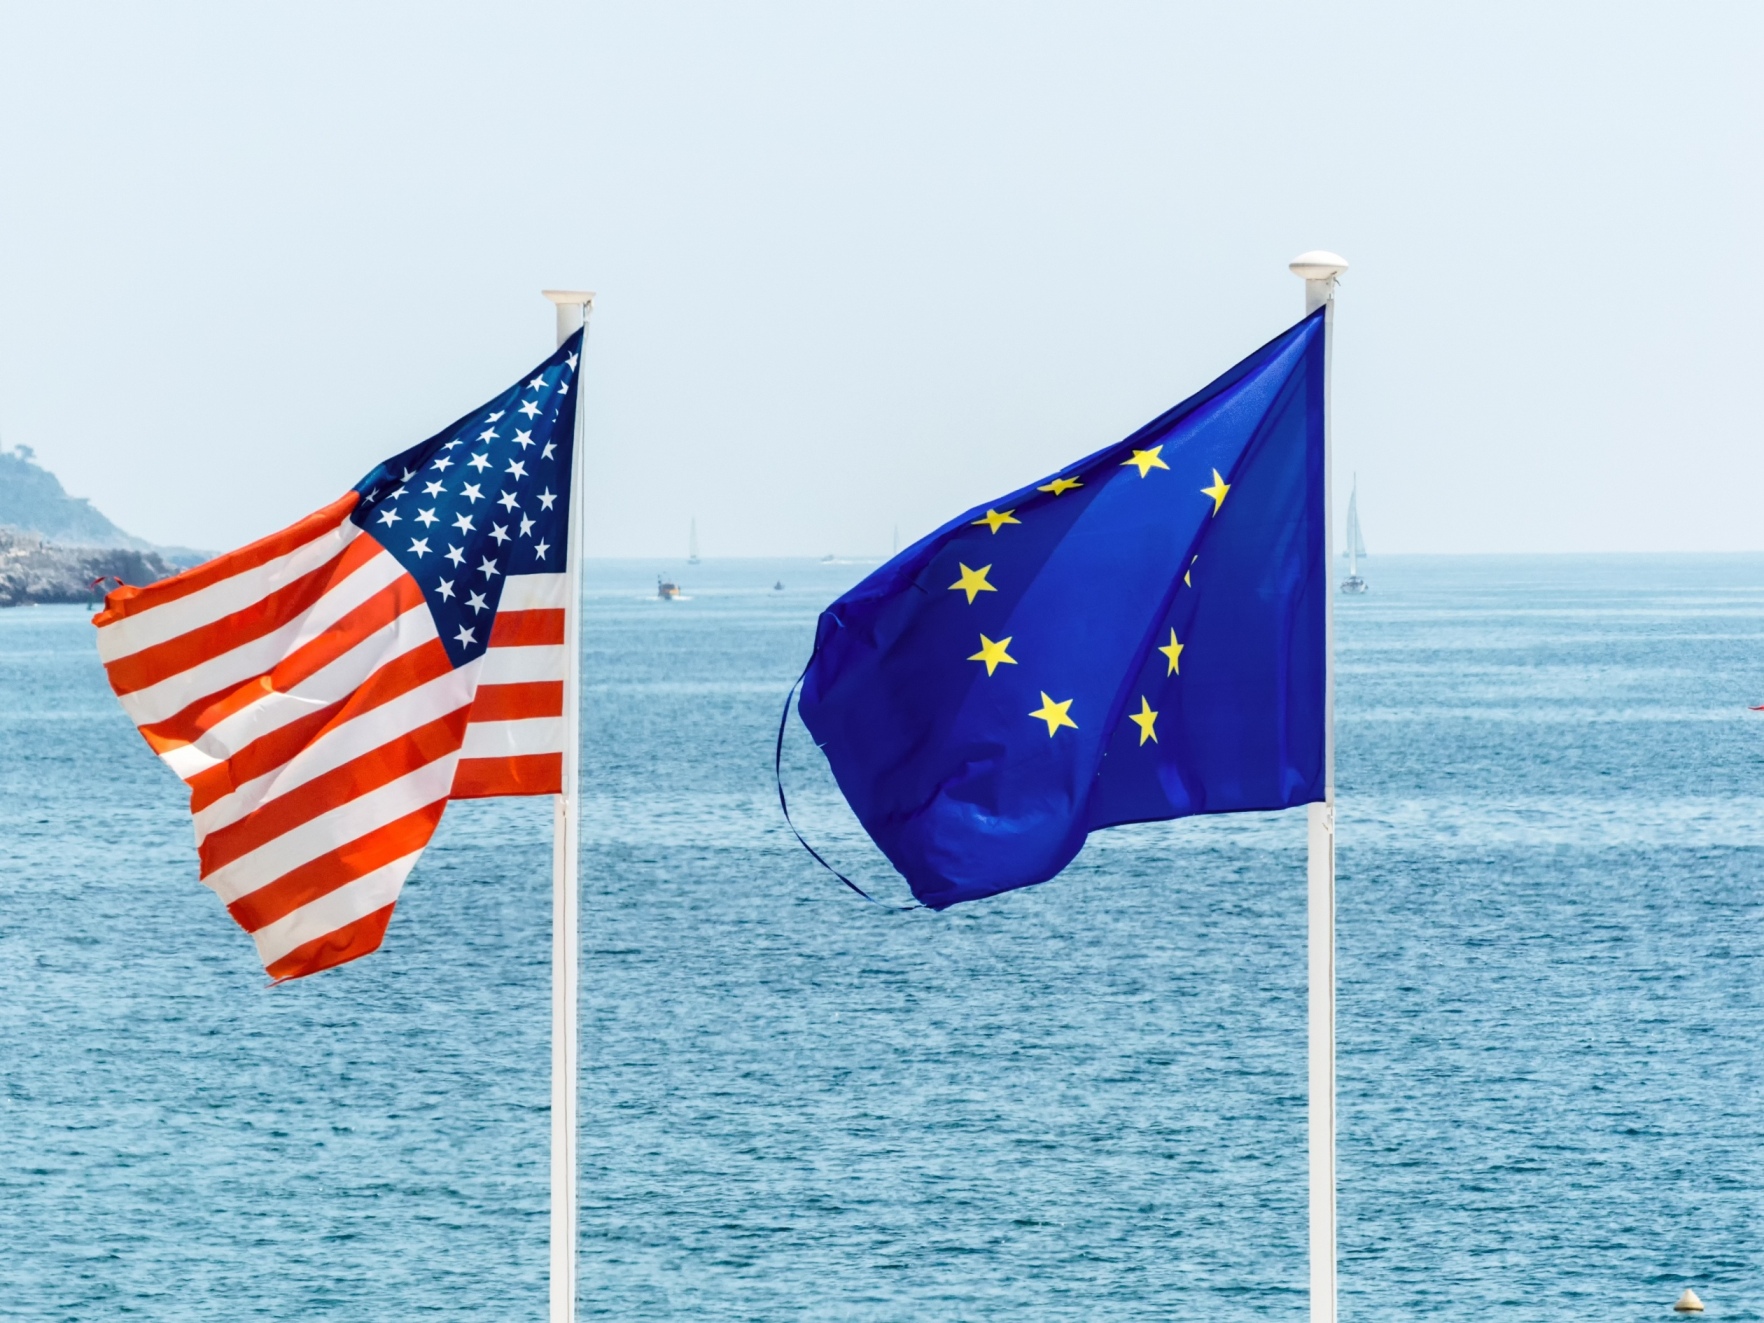 Europe and the US